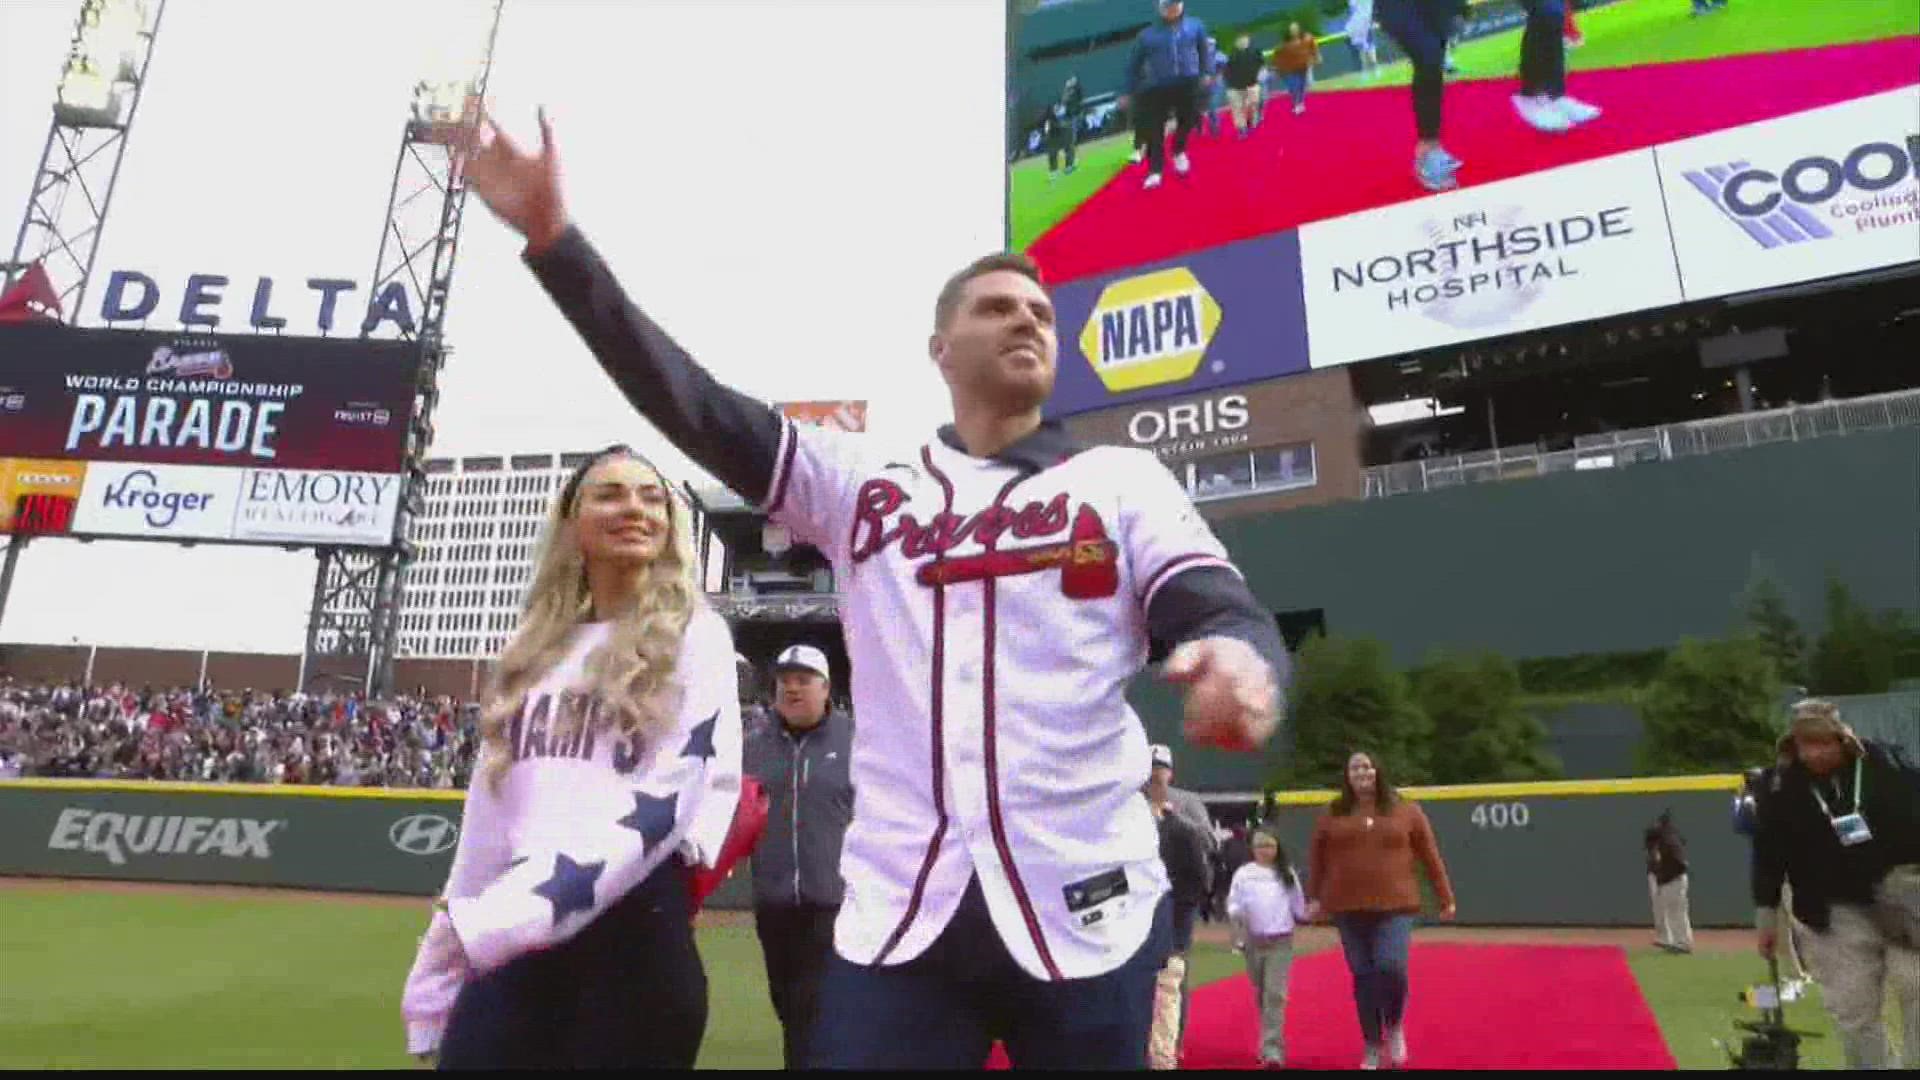 Here is a breakdown of Friday's Atlanta Braves parade. There is a lot to cover.